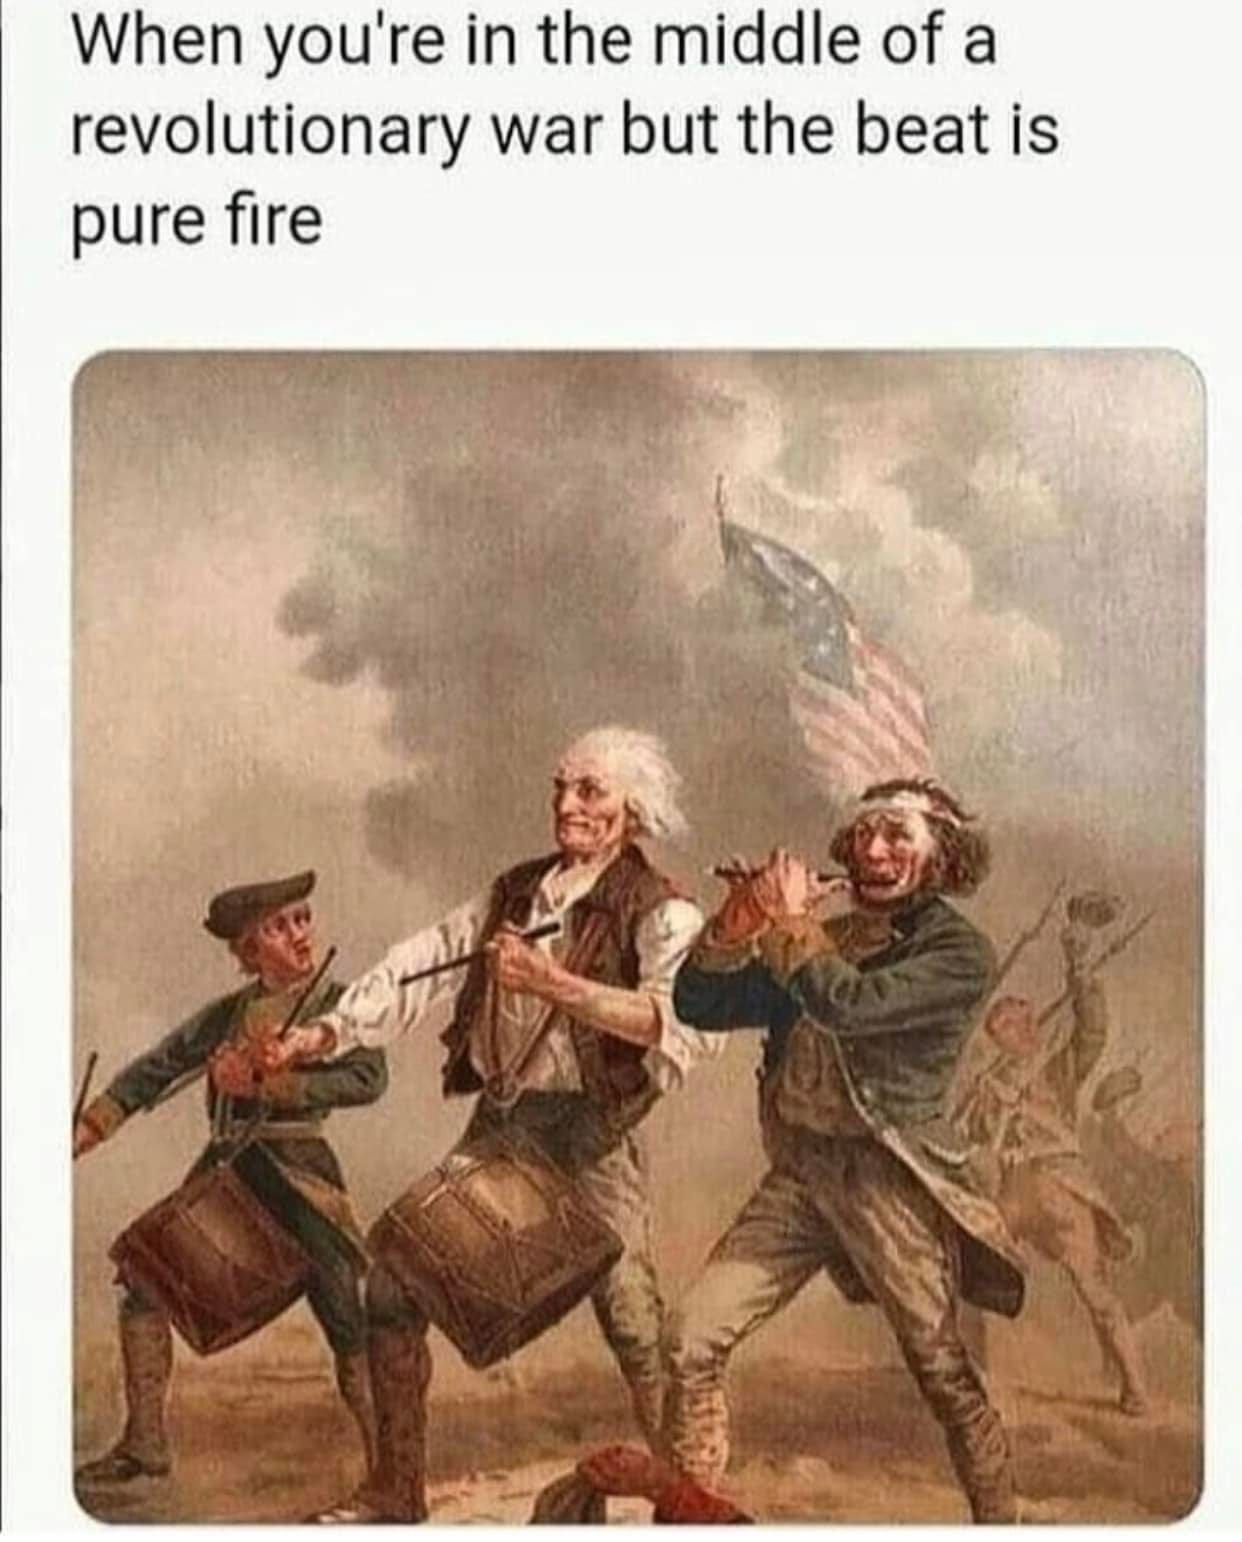 May be an image of 2 people and text that says 'When you're in the middle of a revolutionary war but the beat is pure fire'